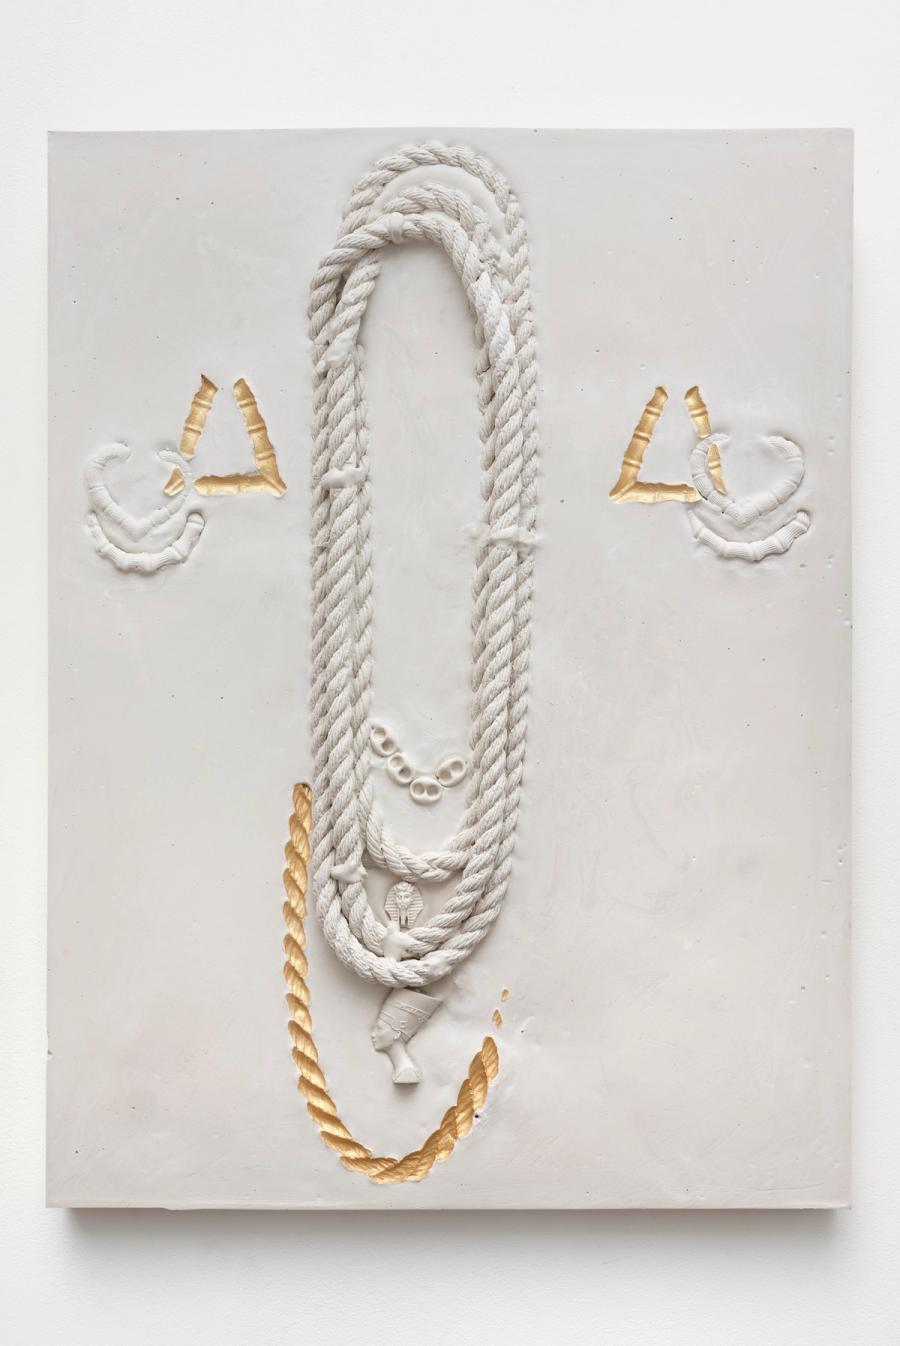 Composition with Rope Chains